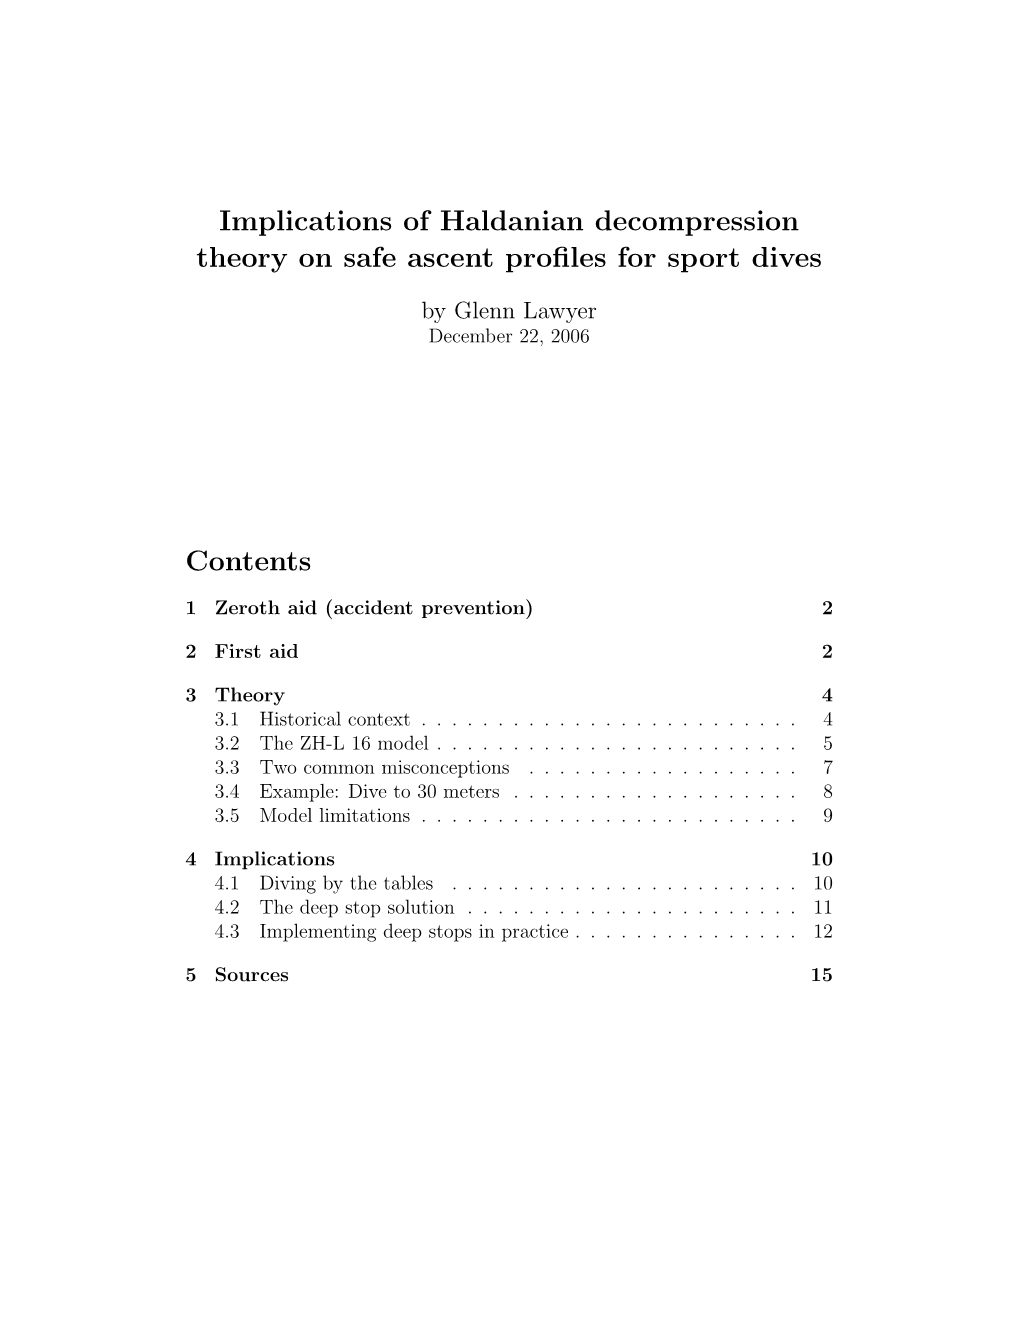 Implications of Haldanian Decompression Theory on Safe Ascent Proﬁles for Sport Dives